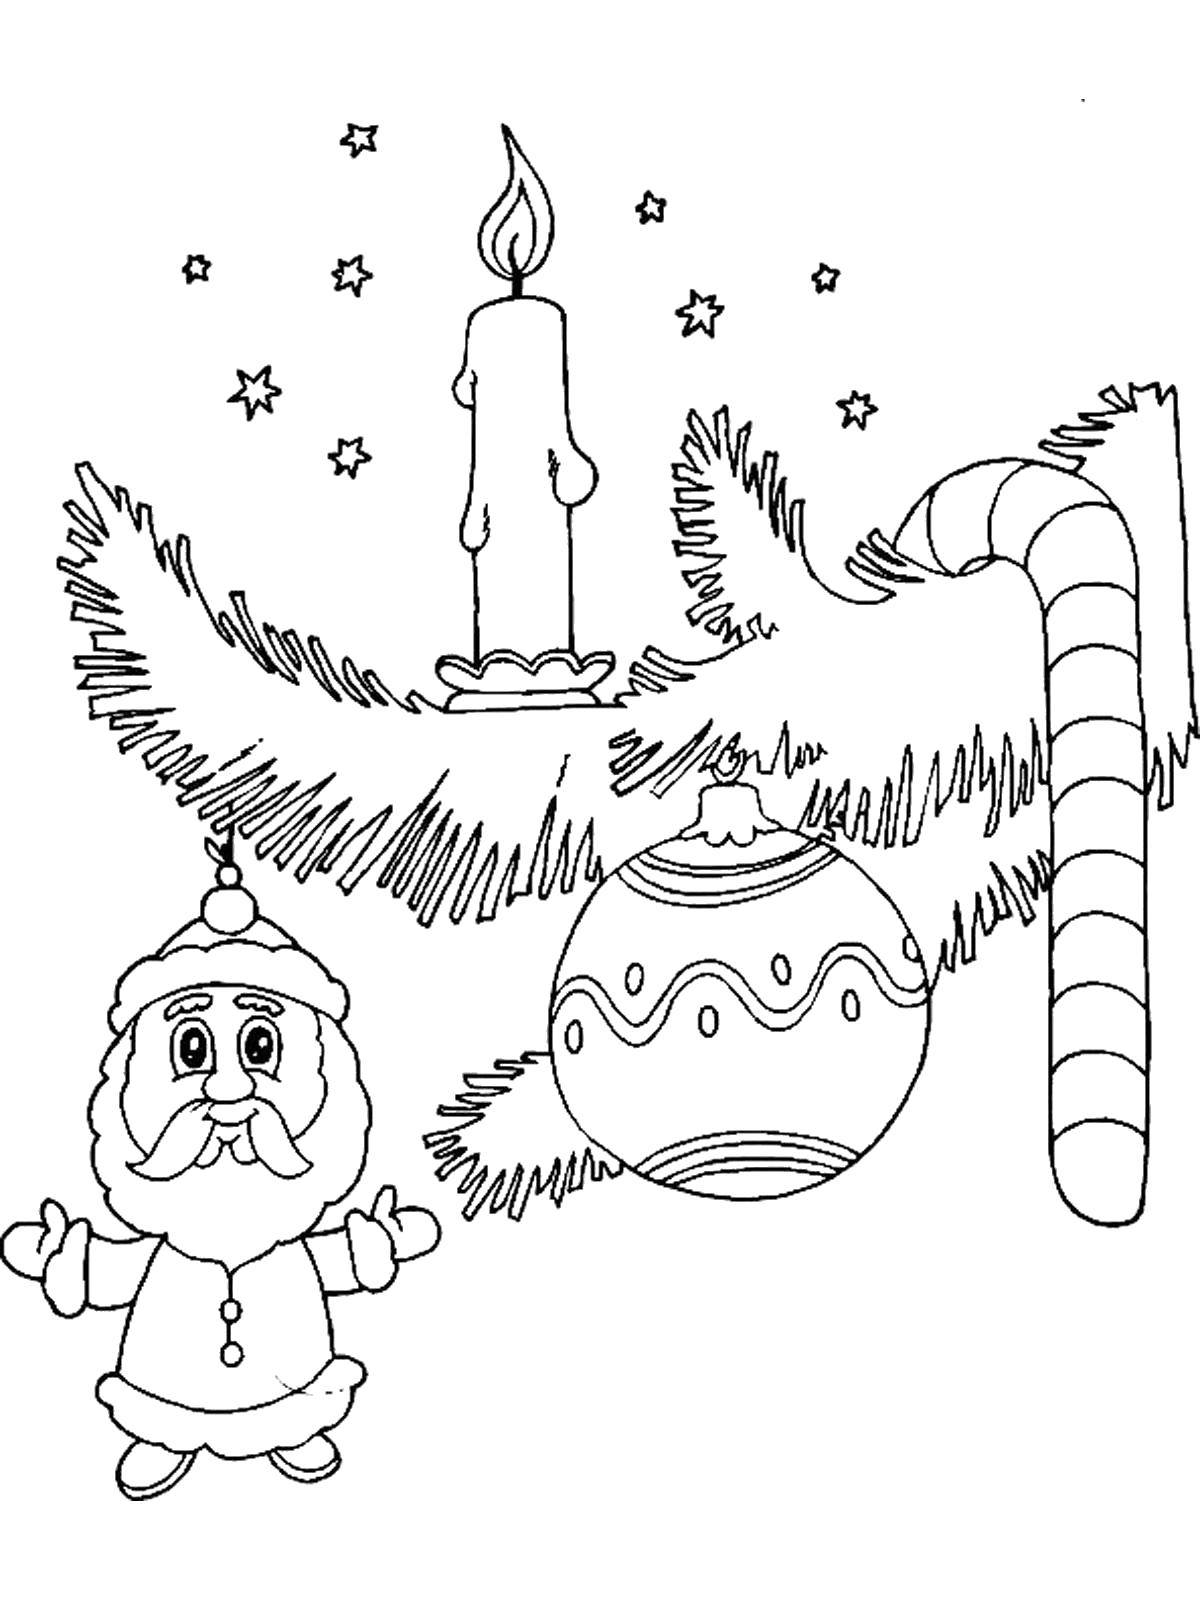 Coloring Santa Claus and Christmas decorations. Category Christmas decorations. Tags:  New Year, Christmas toy.